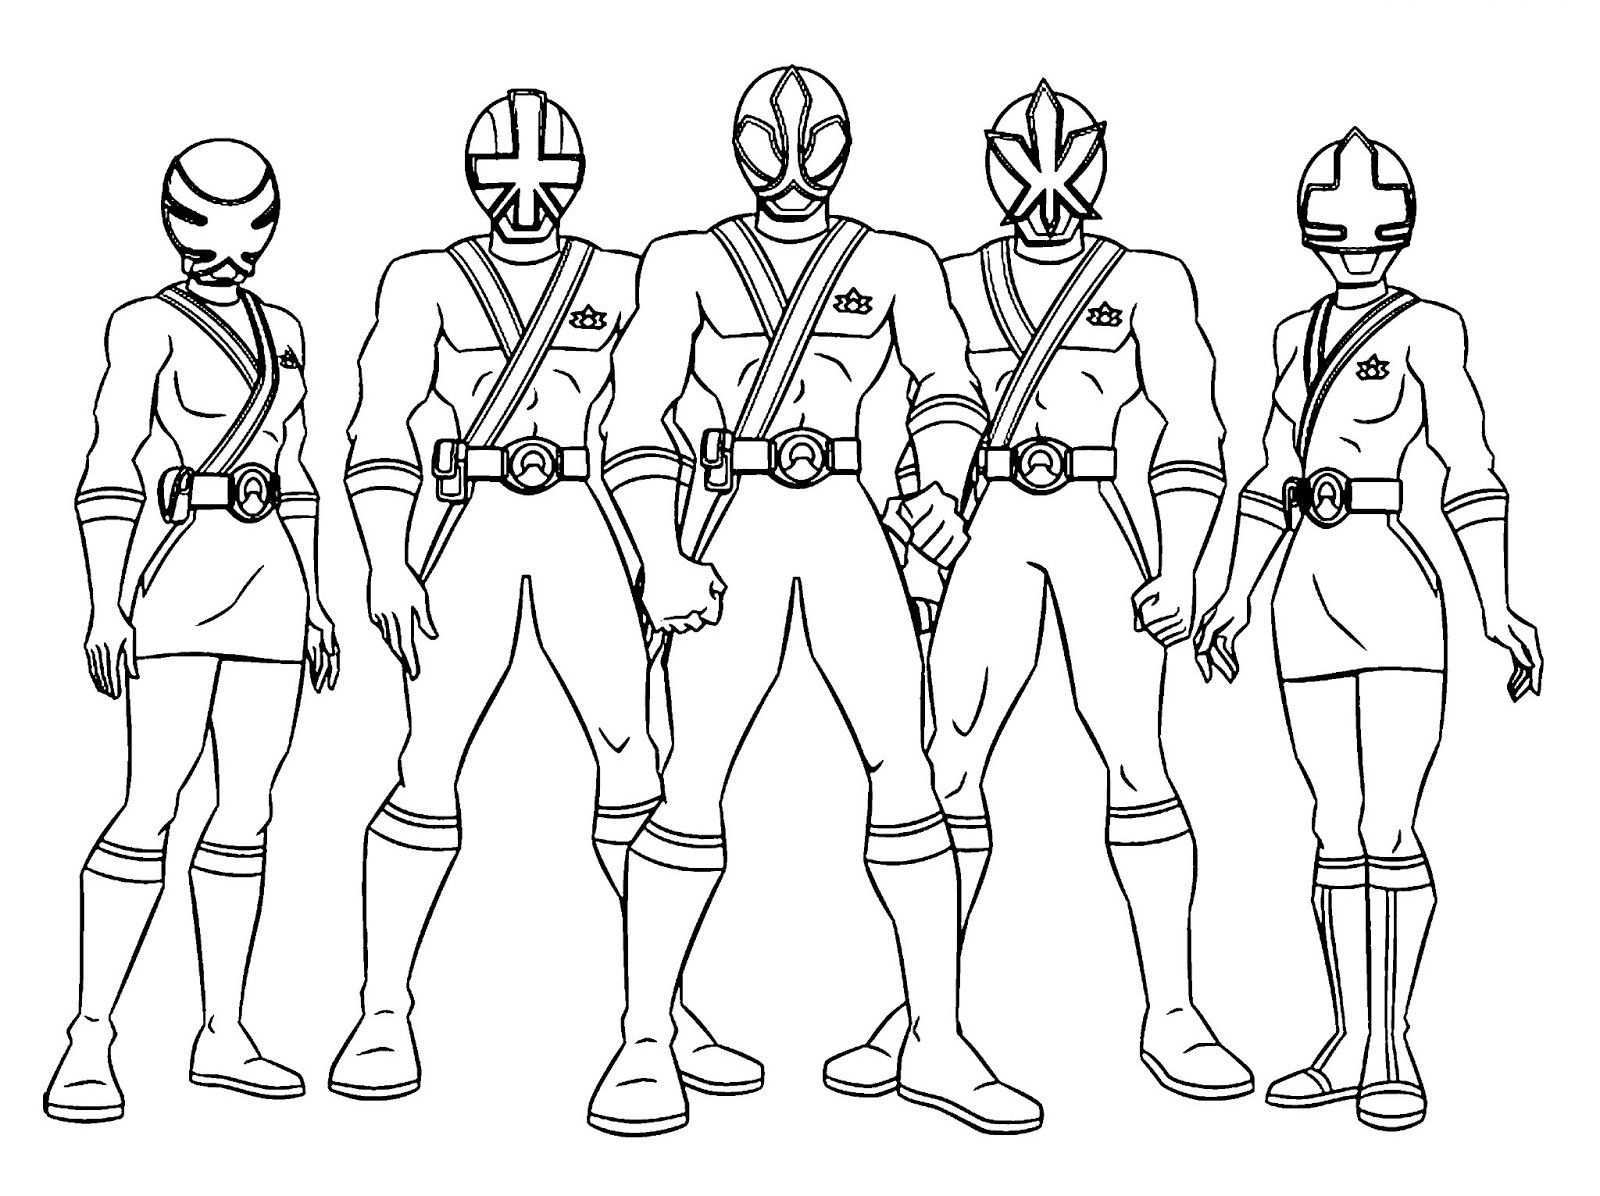 Power Rangers Coloring Pages 04 Power Rangers Coloring Pages Power Rangers Power Rang